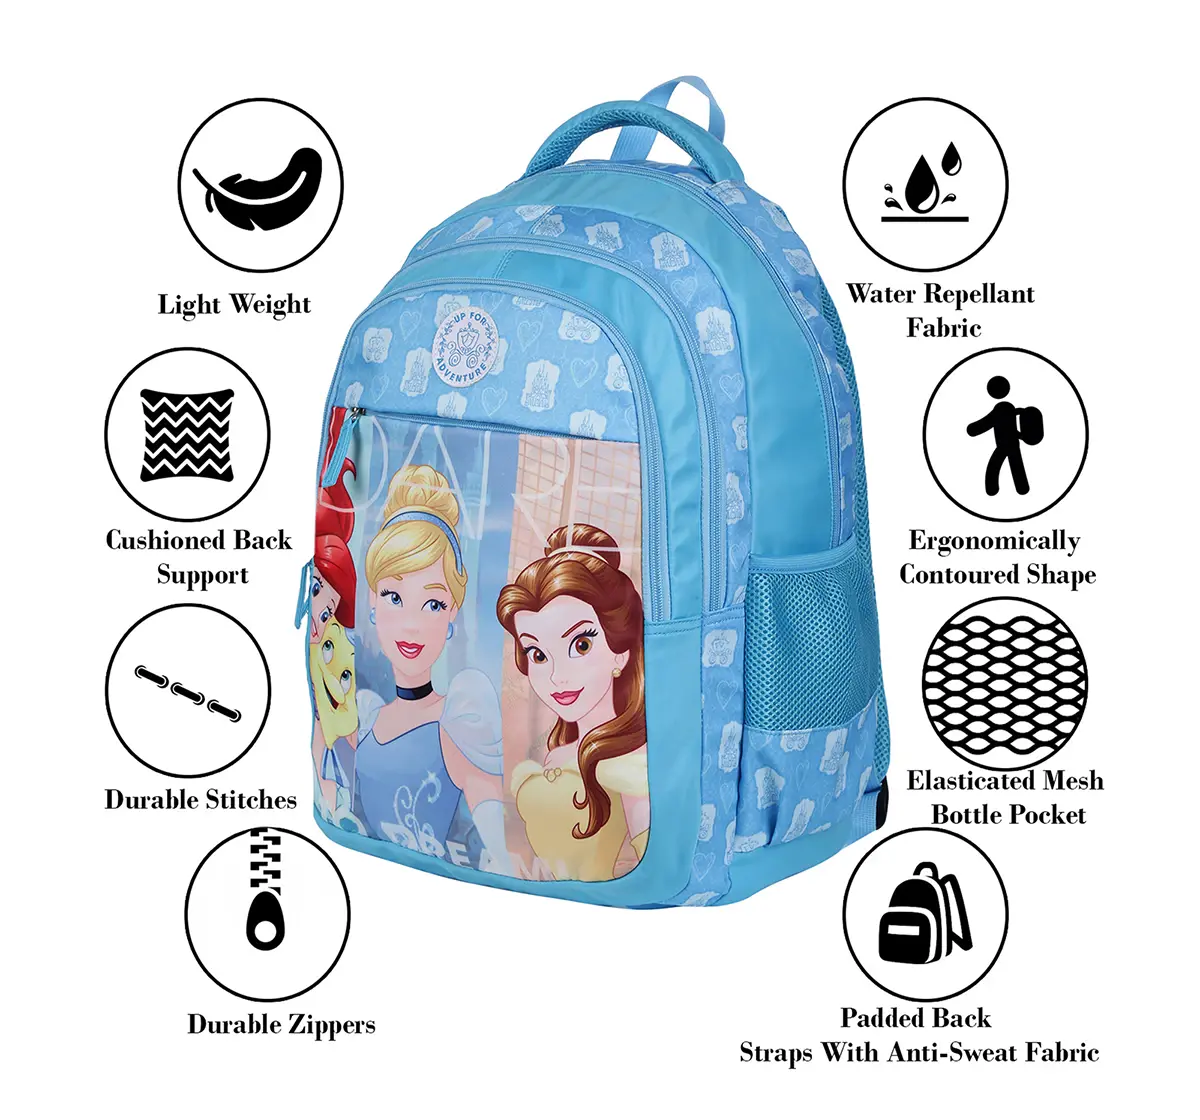 Disney Princess Adventure Blue 15" Backpack Bags for age 3Y+ 